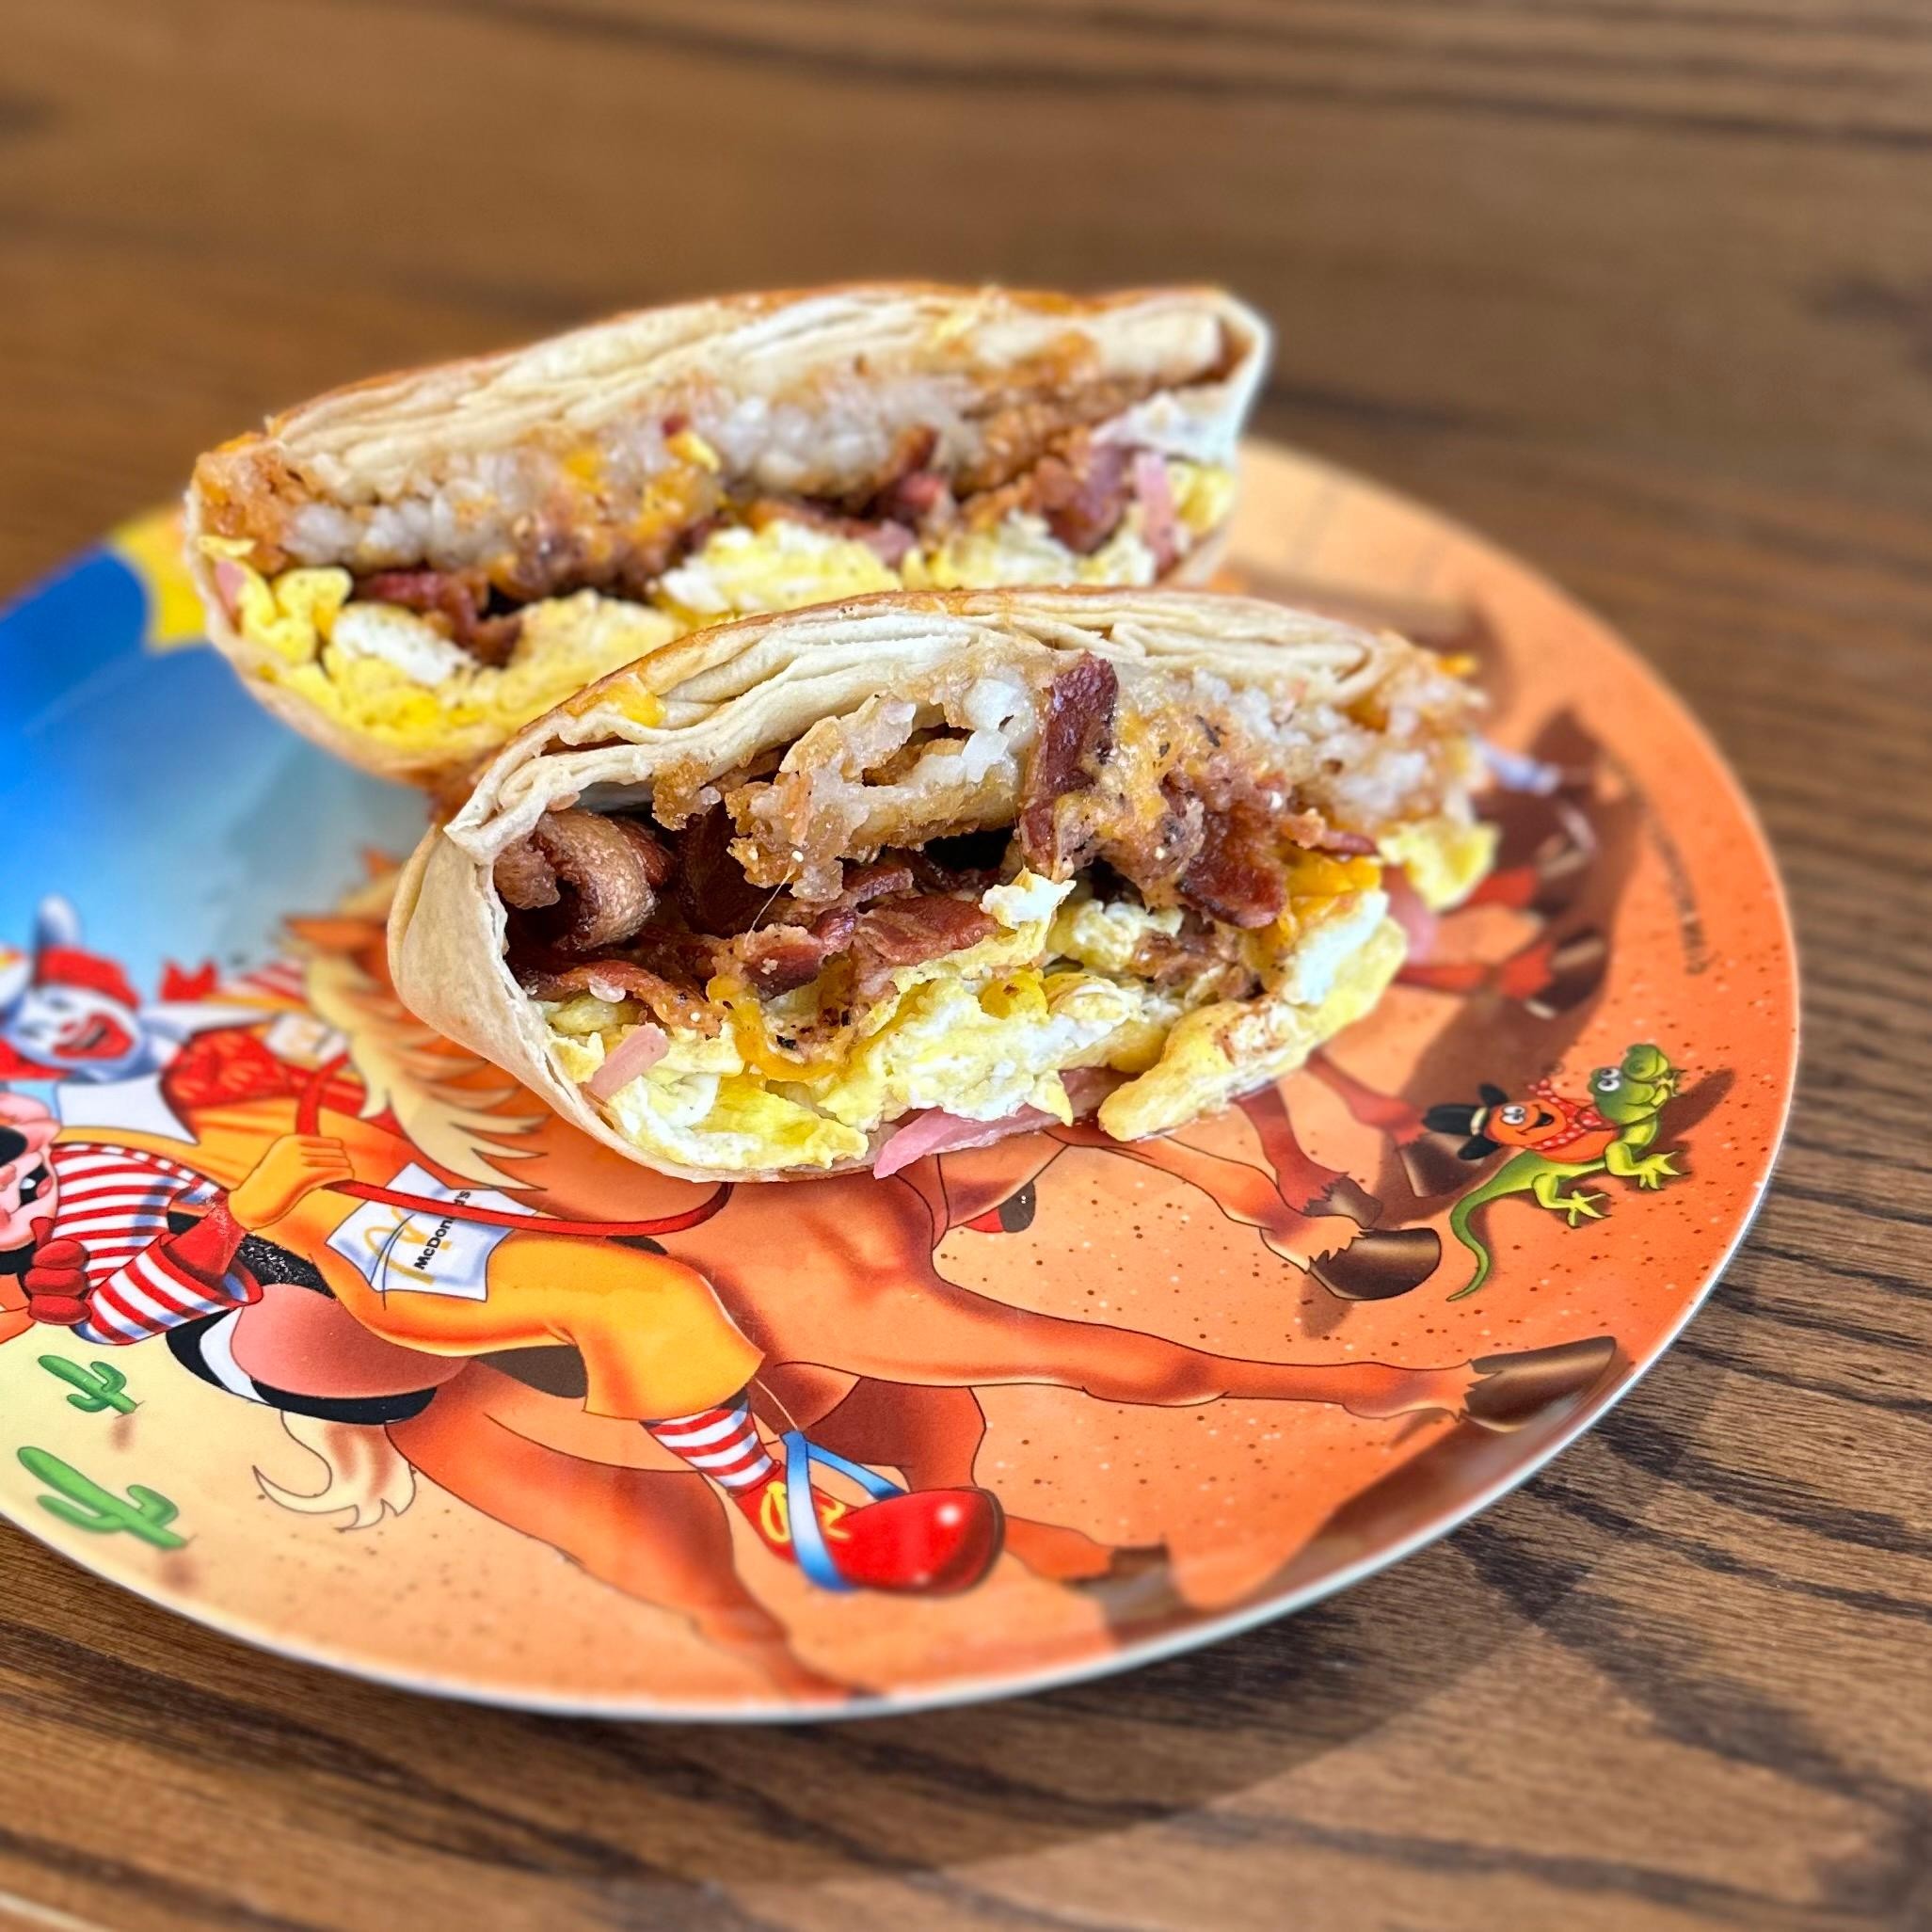 BACON, EGG, AND CHEESE CRUNCHWRAP